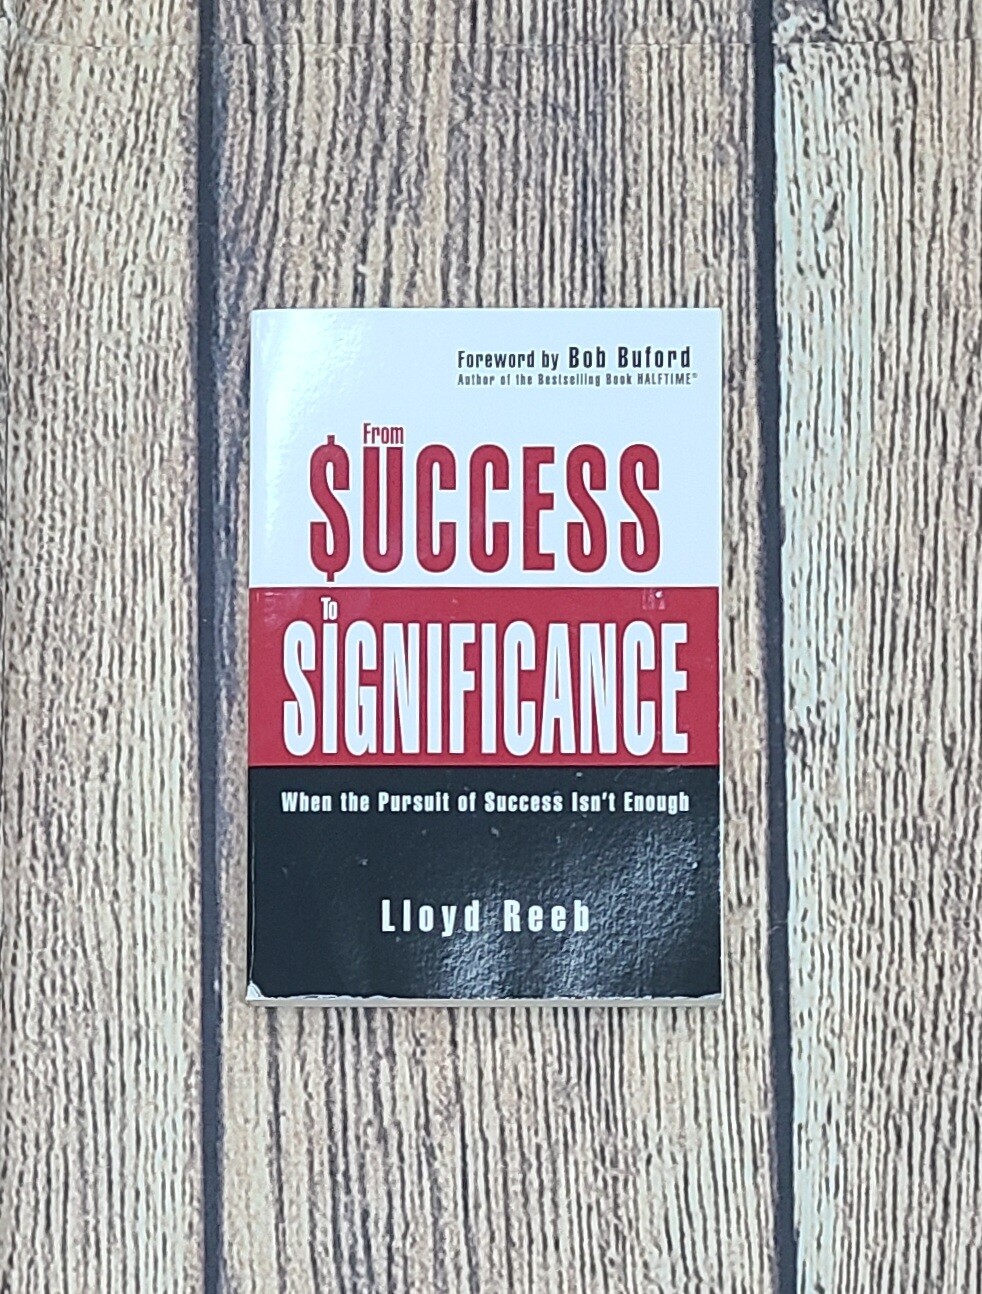 From Success to Significance by Lloyd Reeb